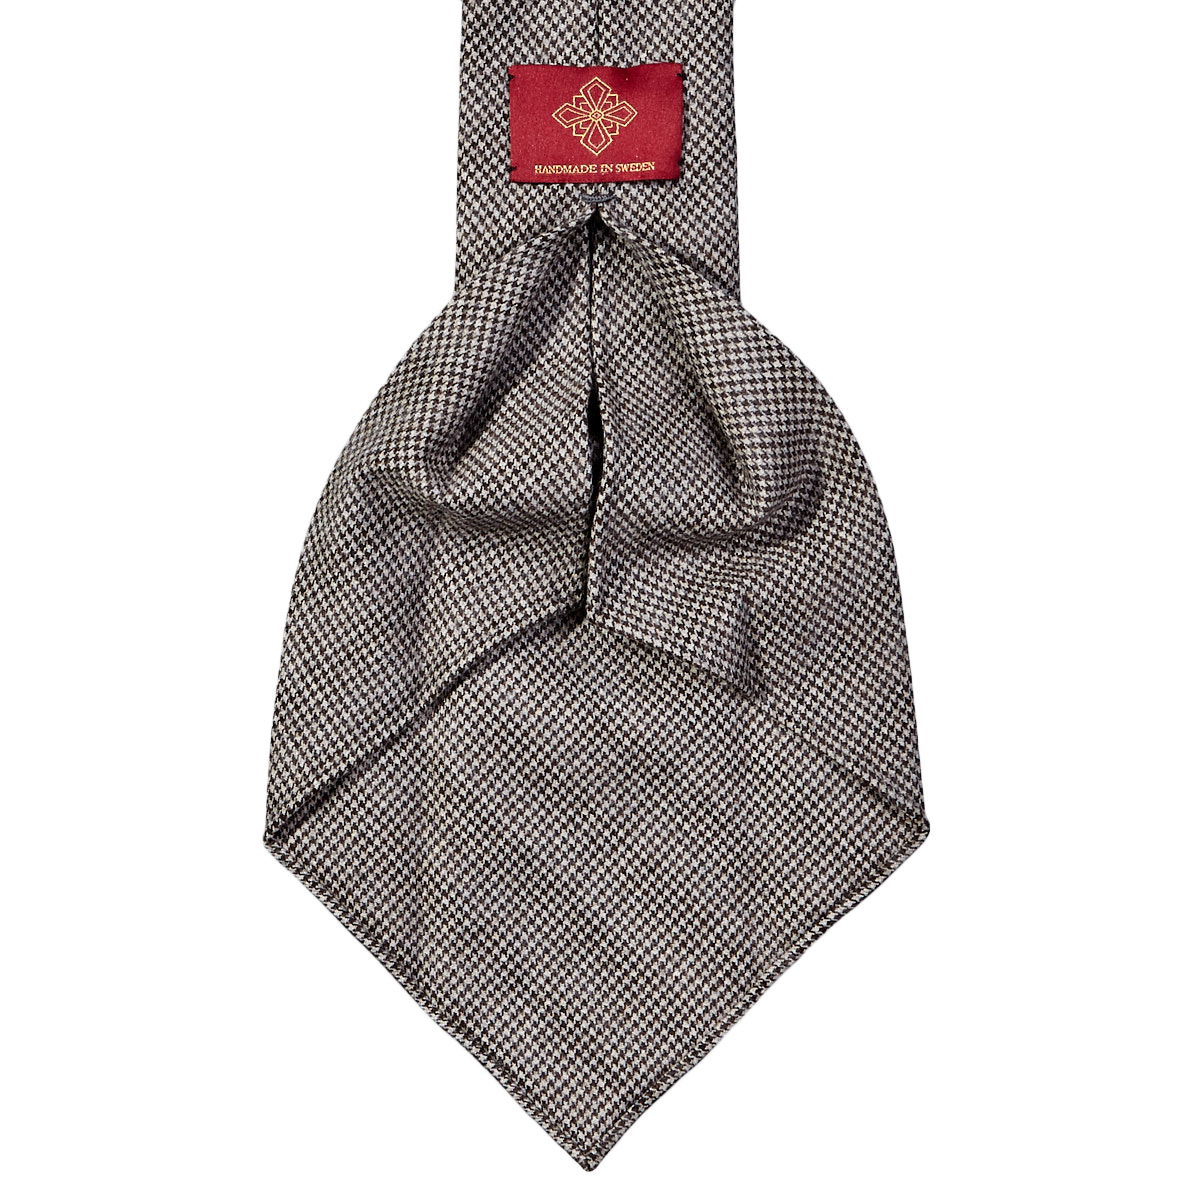 A handmade Dreaming Of Monday Brown Houndstooth 7-Fold Vintage Wool Tie on a white background.